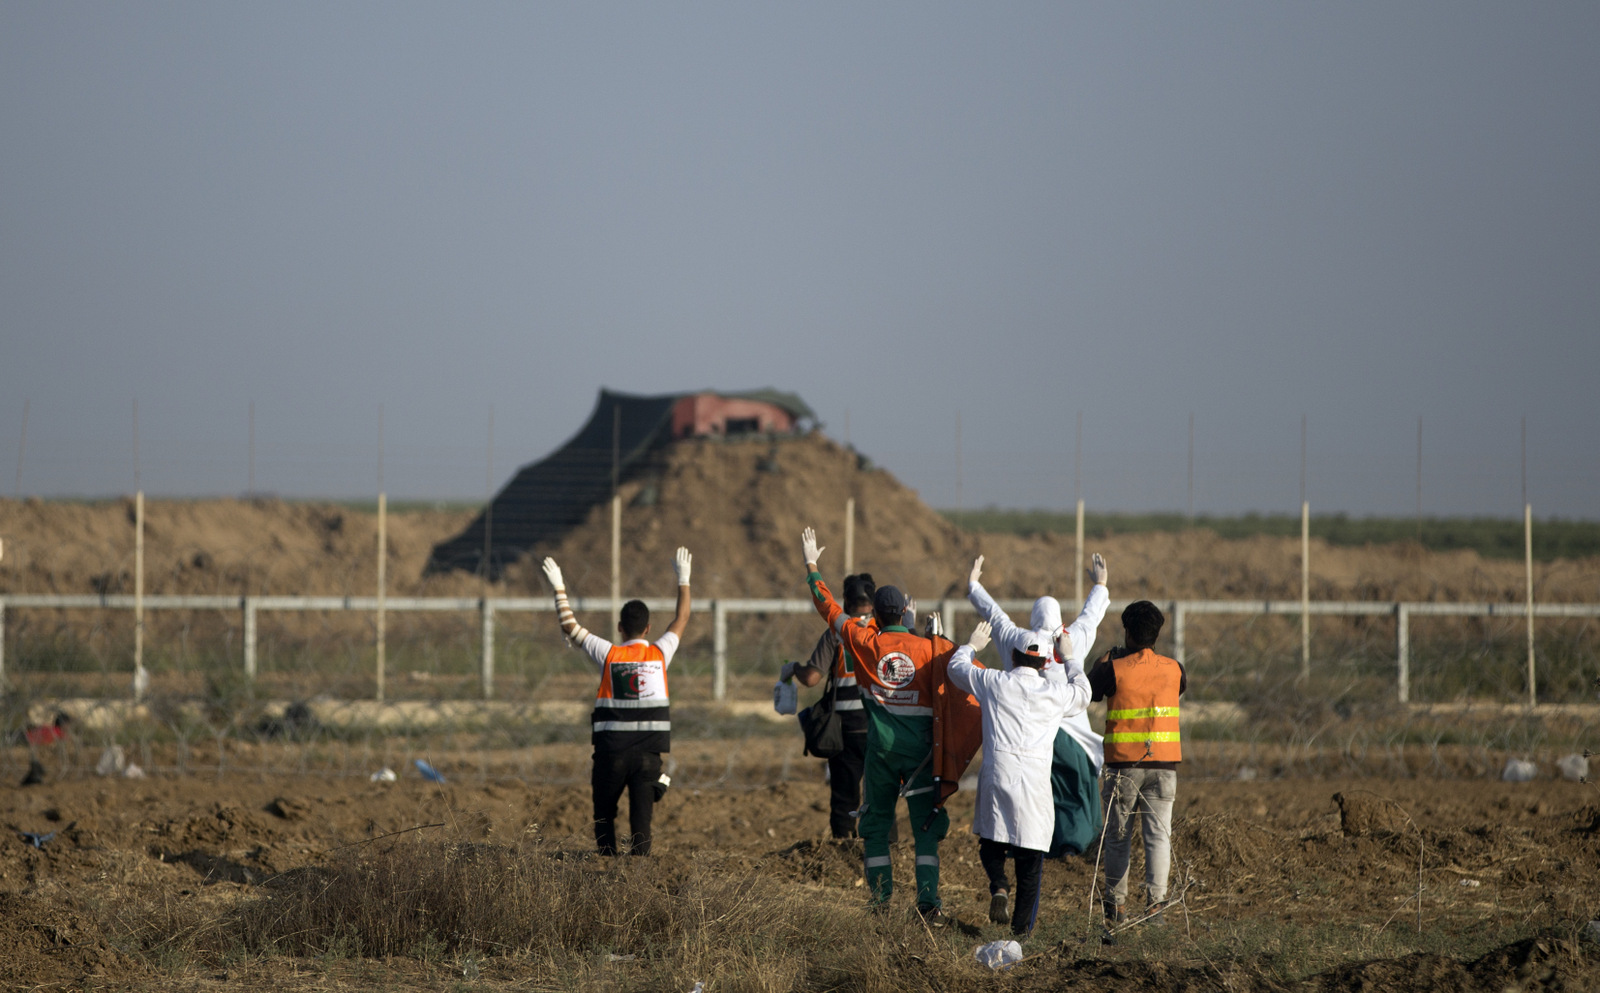 Palestinian medics raise their hands while walking towards an Israeli sniper nest near the border with Israel to evacuate injured protesters, May 15, 2018 (AP/Khalil Hamra)